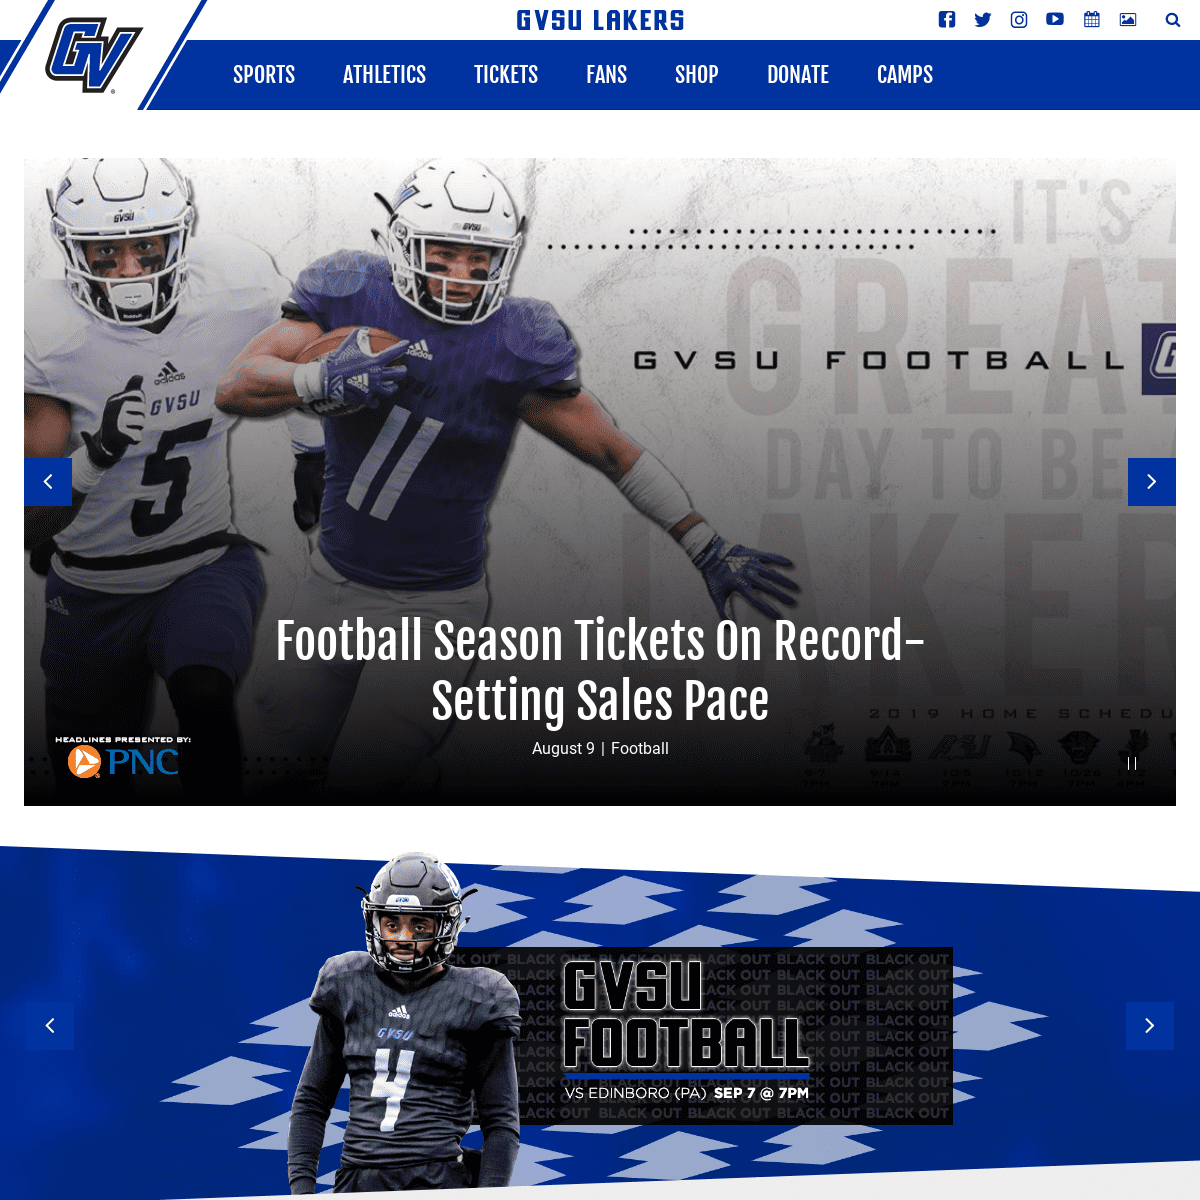 A complete backup of gvsulakers.com